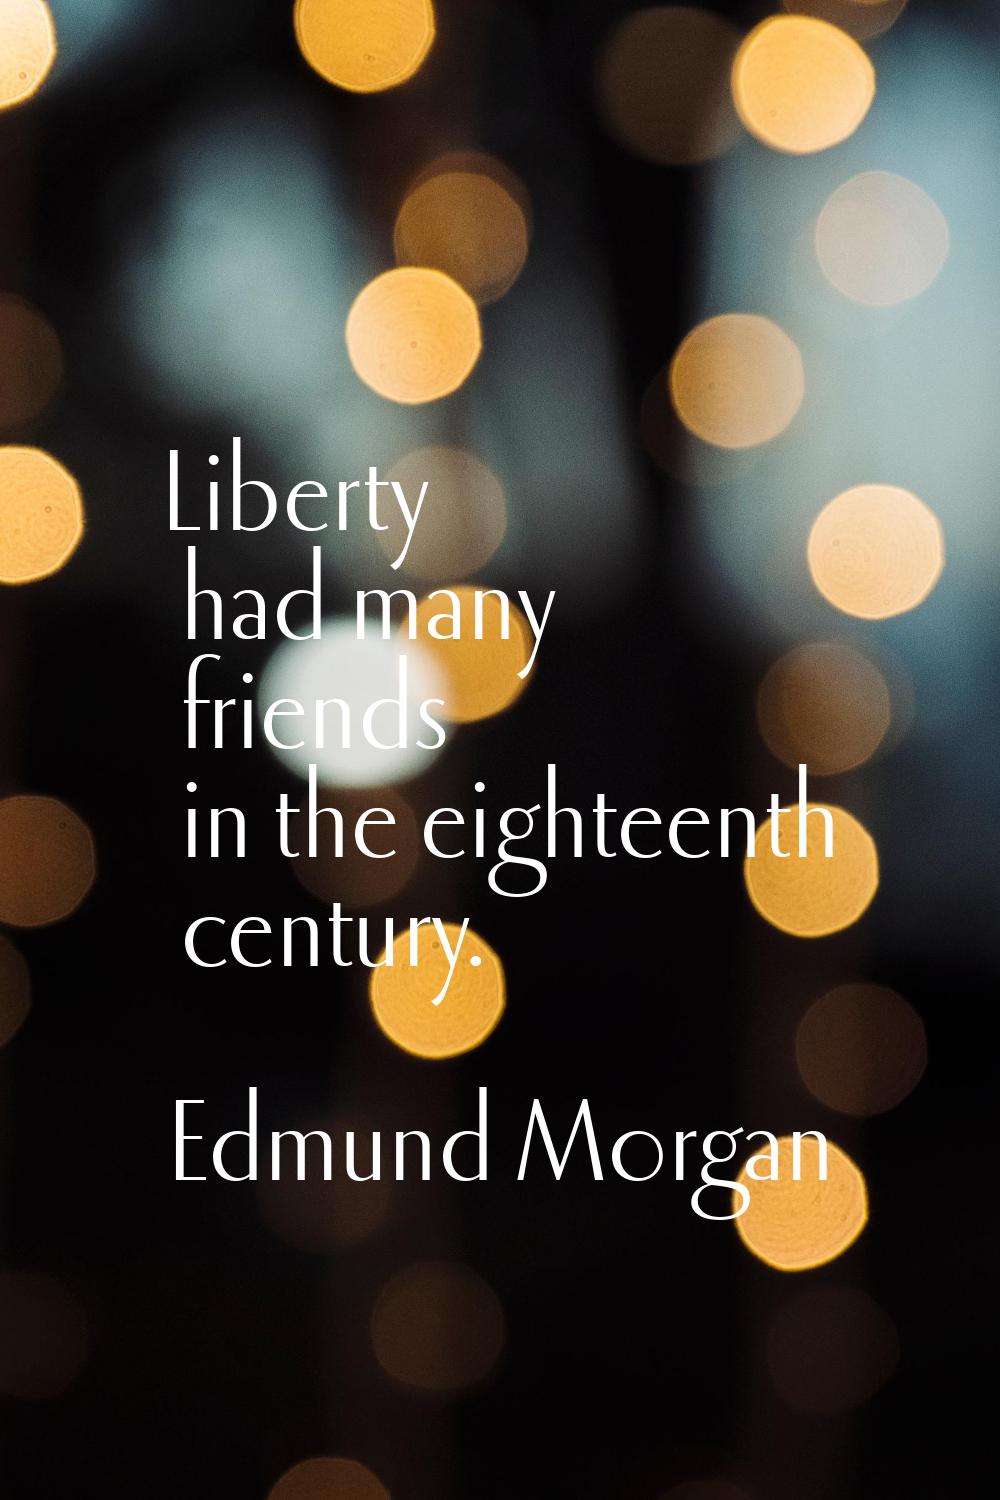 Liberty had many friends in the eighteenth century.